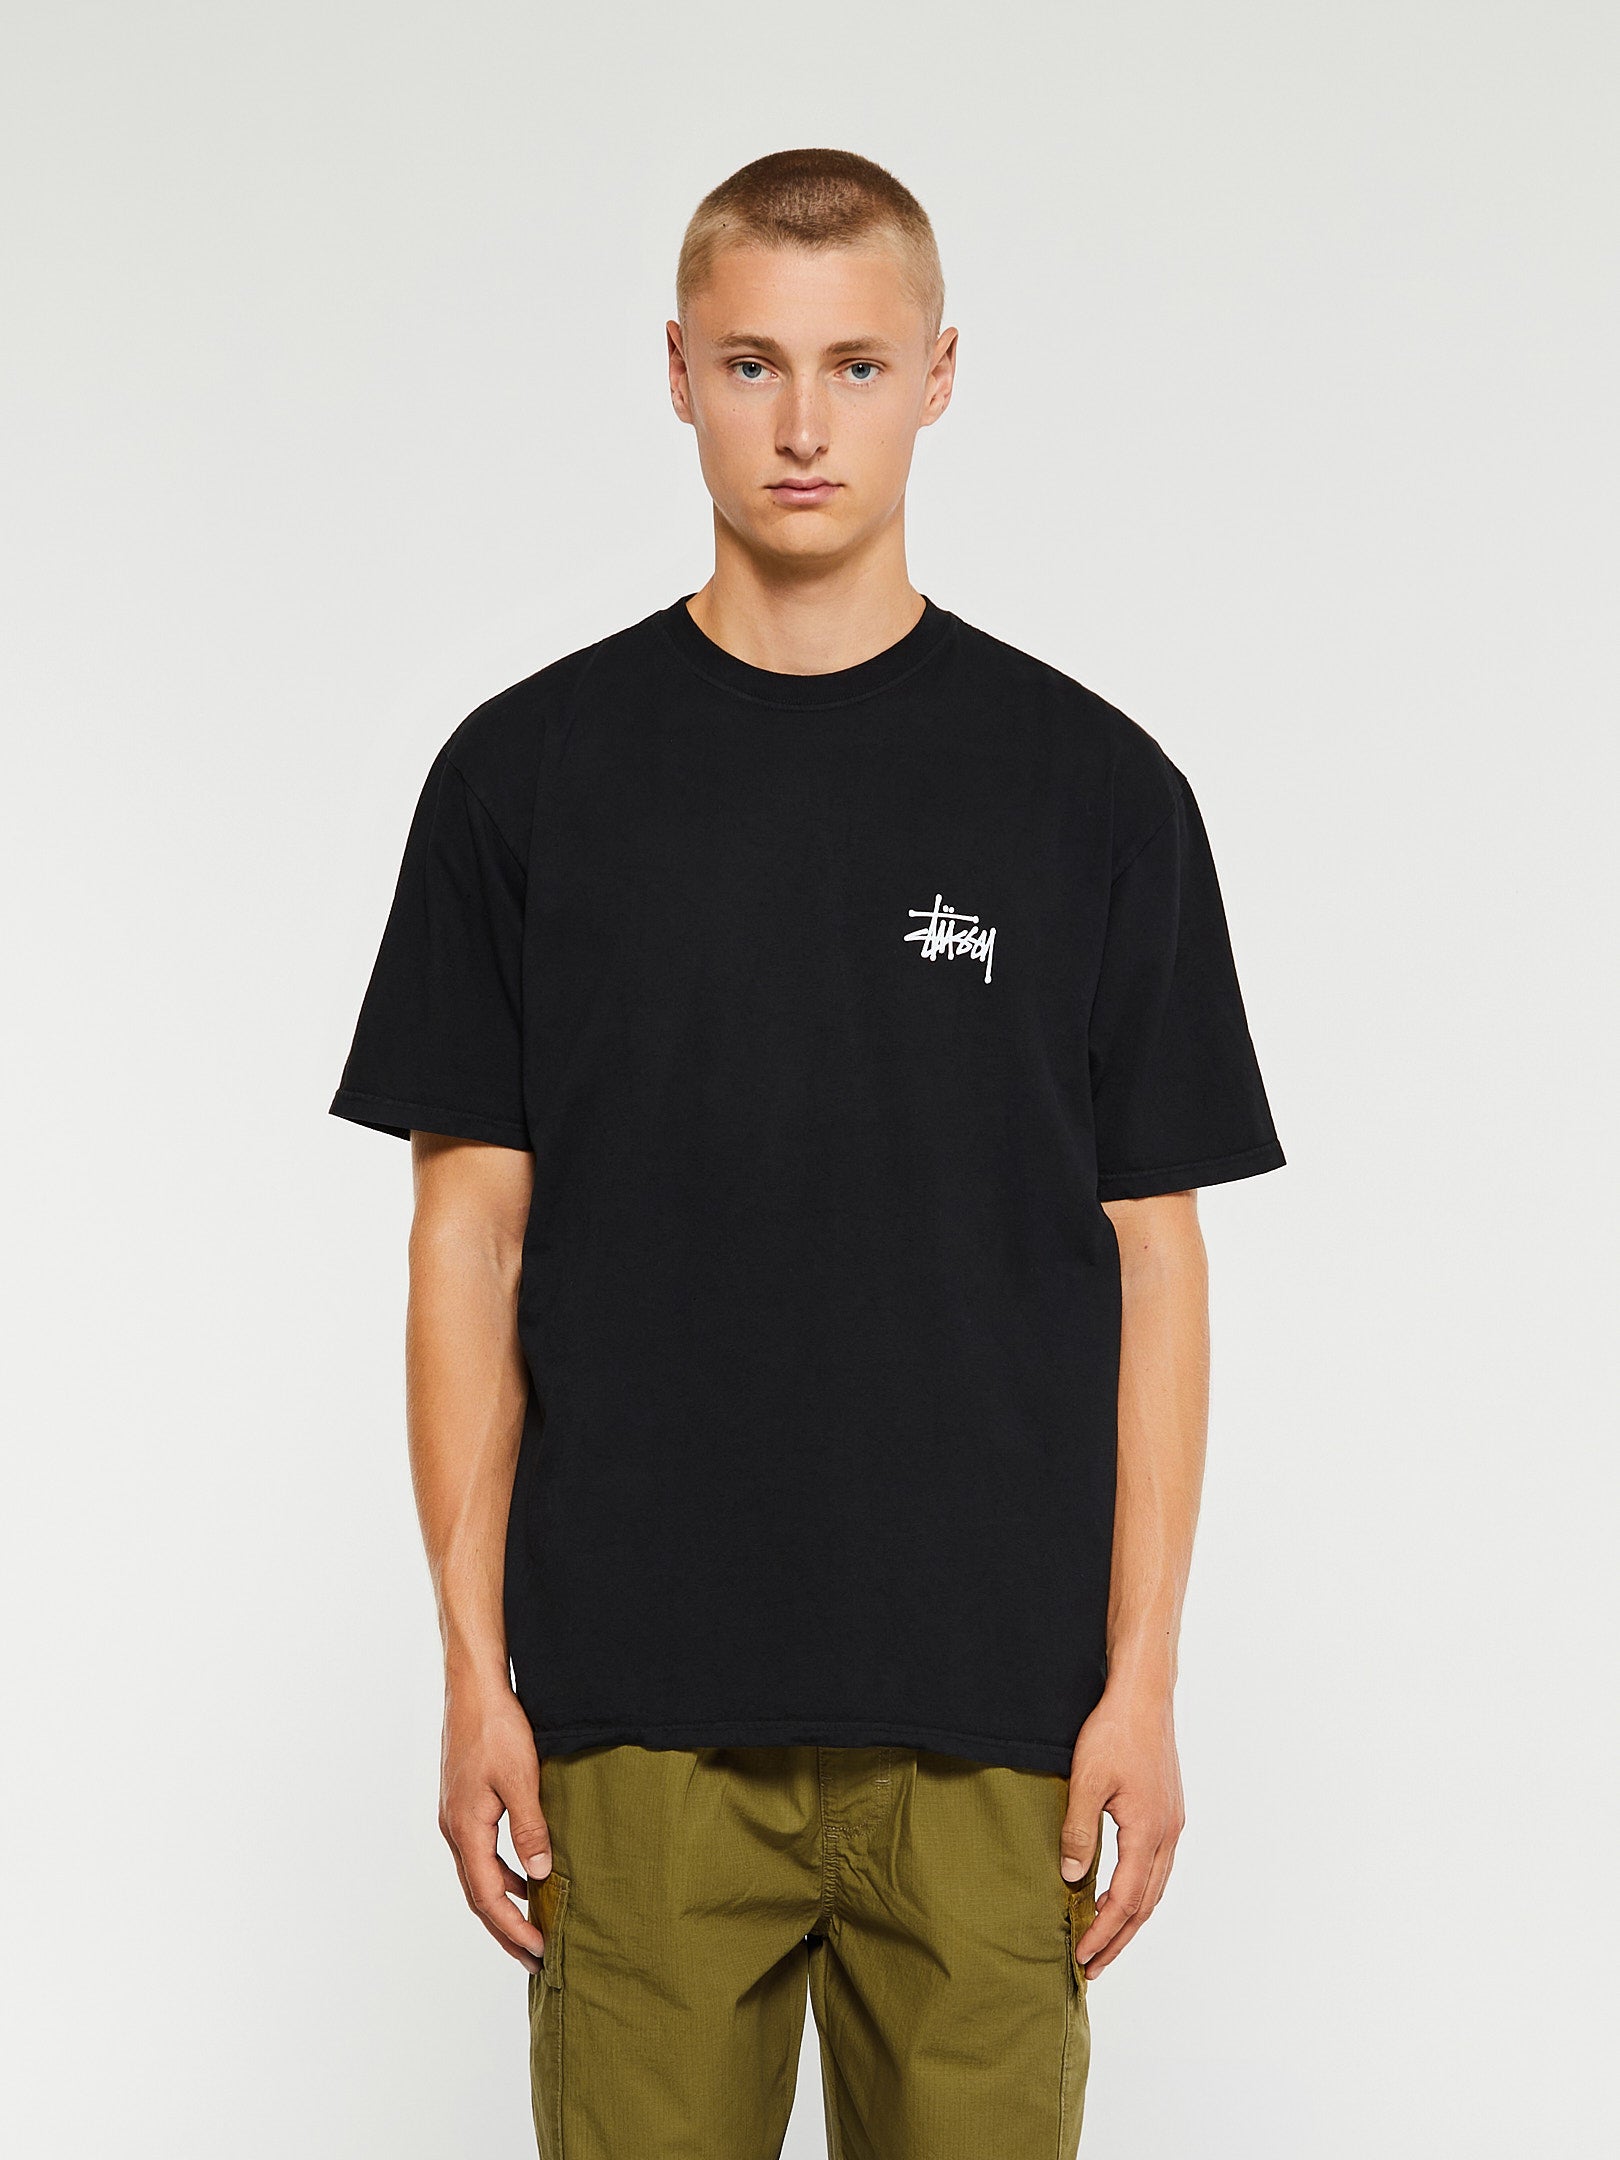 Basic Pigment Dyed T-Shirt in Black